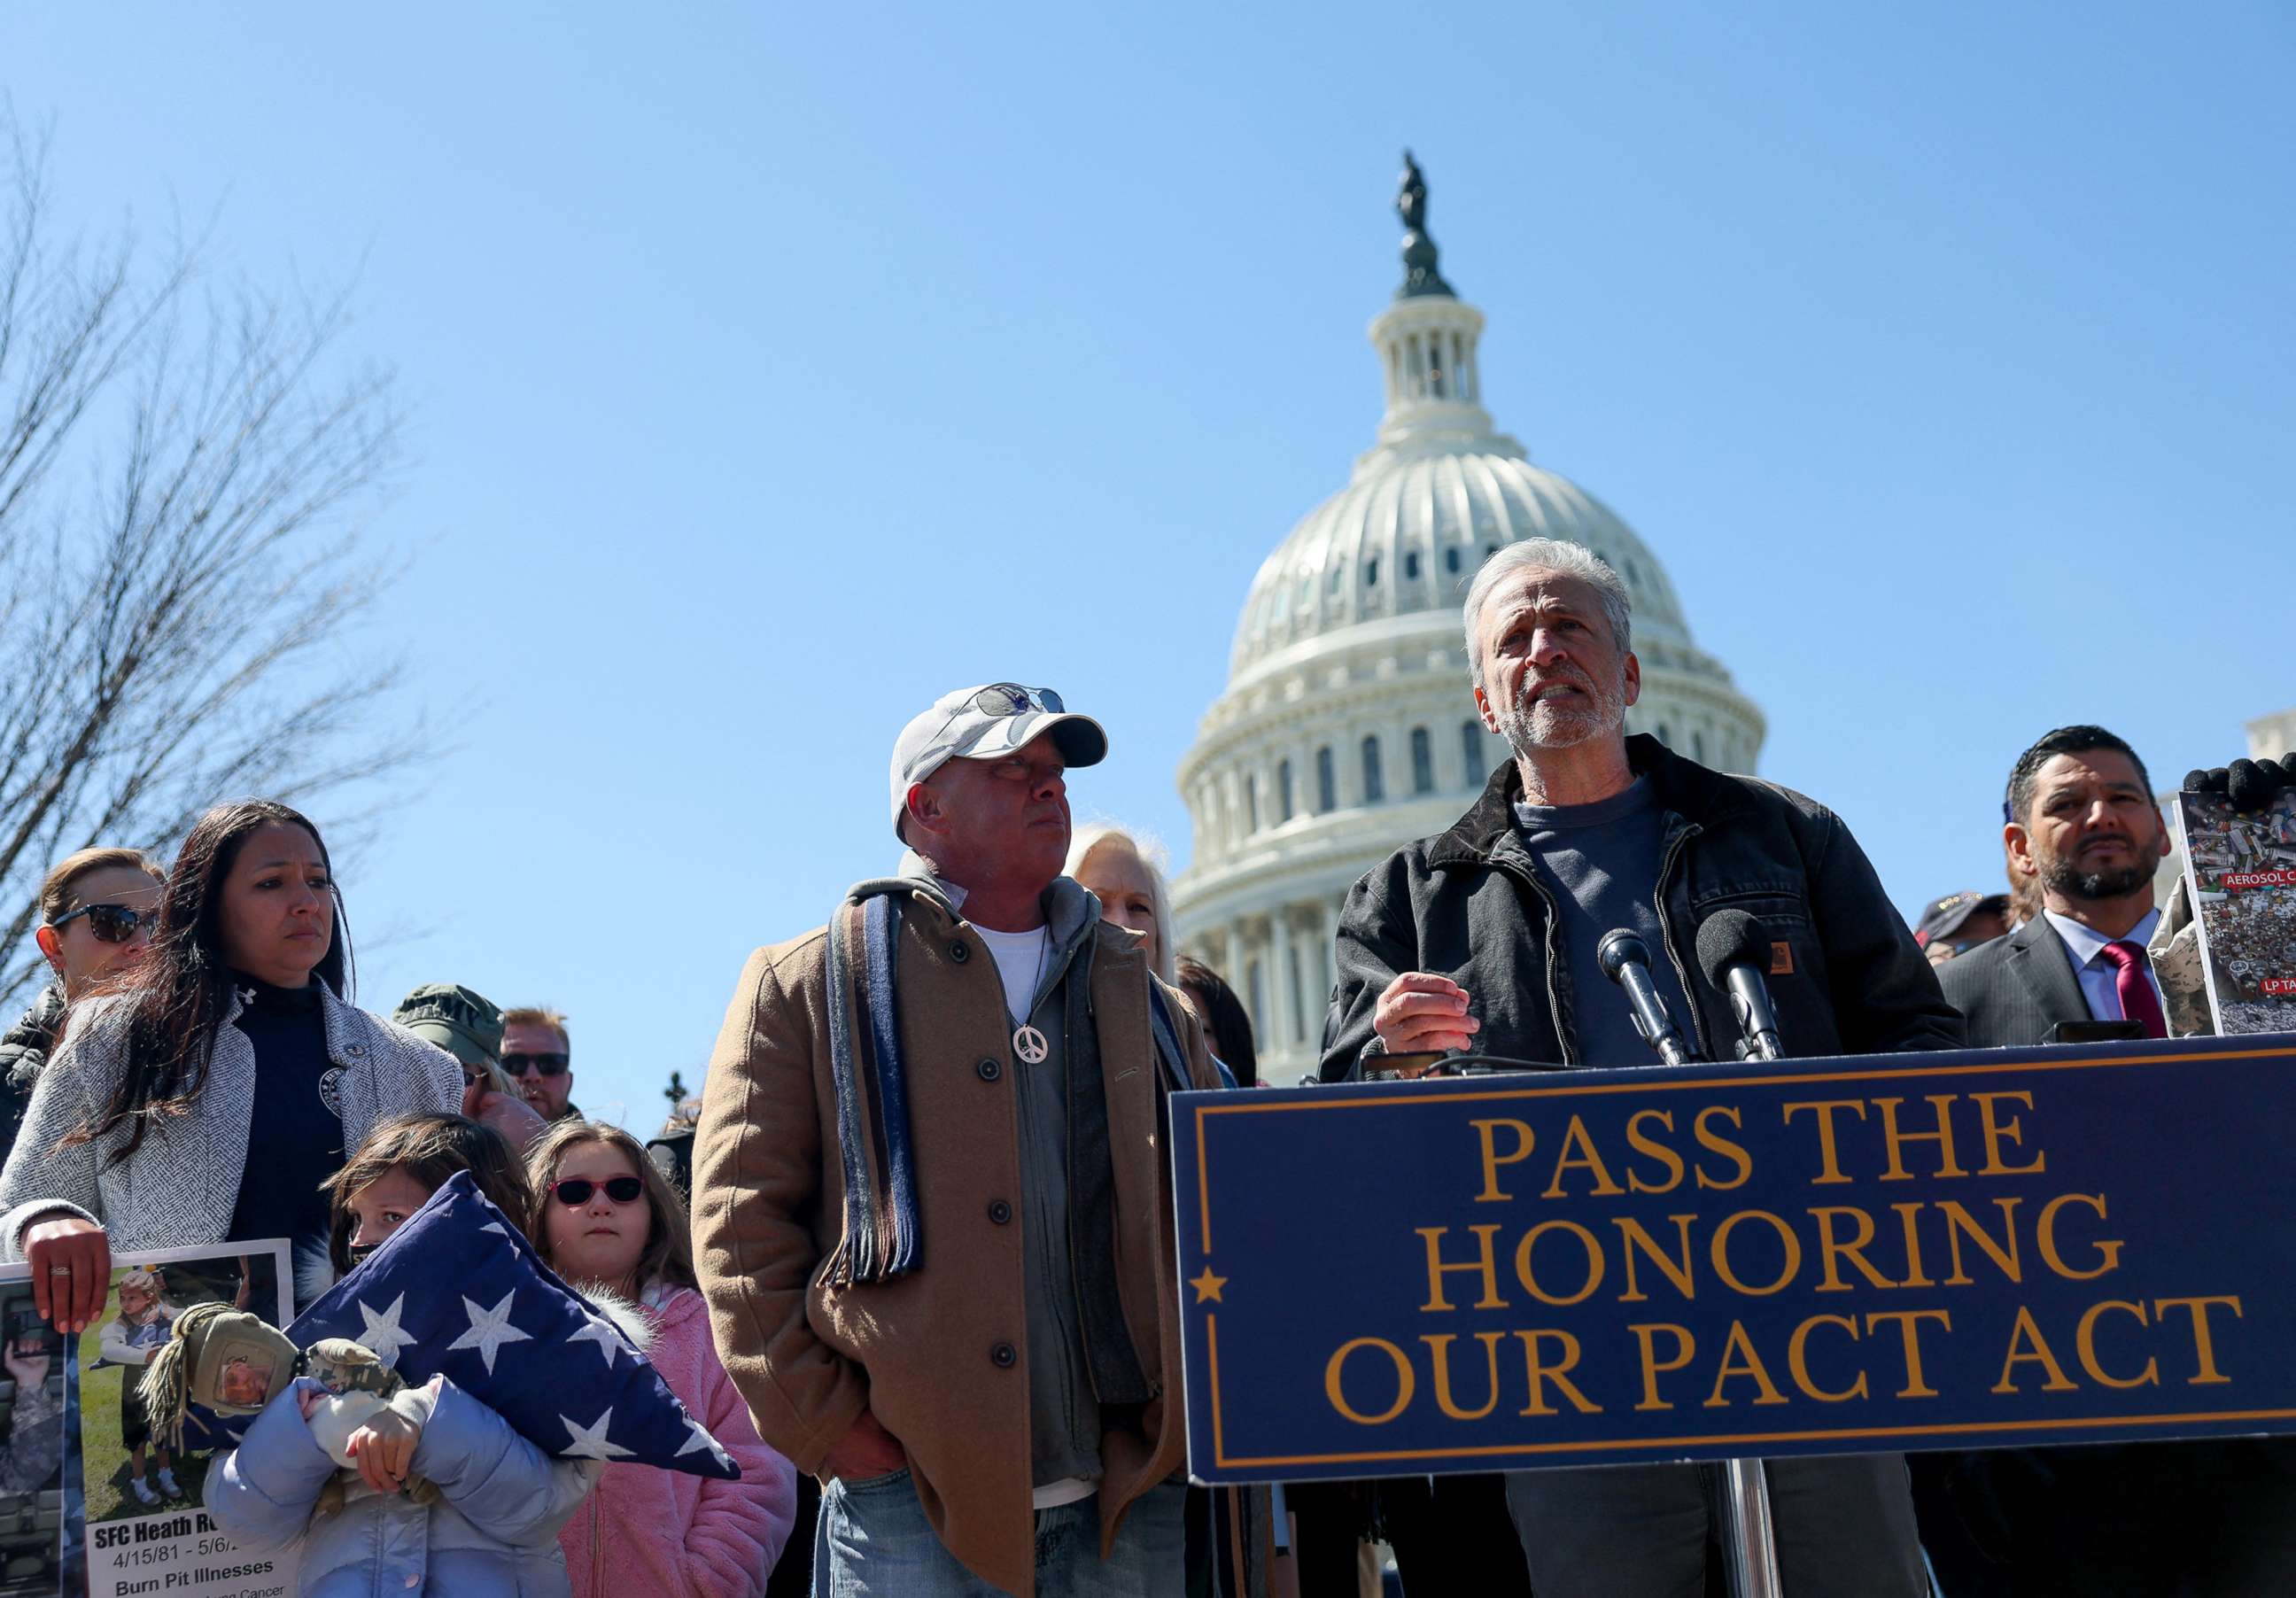 PHOTO: Veterans' Advocate Jon Stewart speaks at a press conference on the need to pass the Honoring Our PACT Act legislation to extend VA benefits outside the Capitol building, March 29, 2022. 